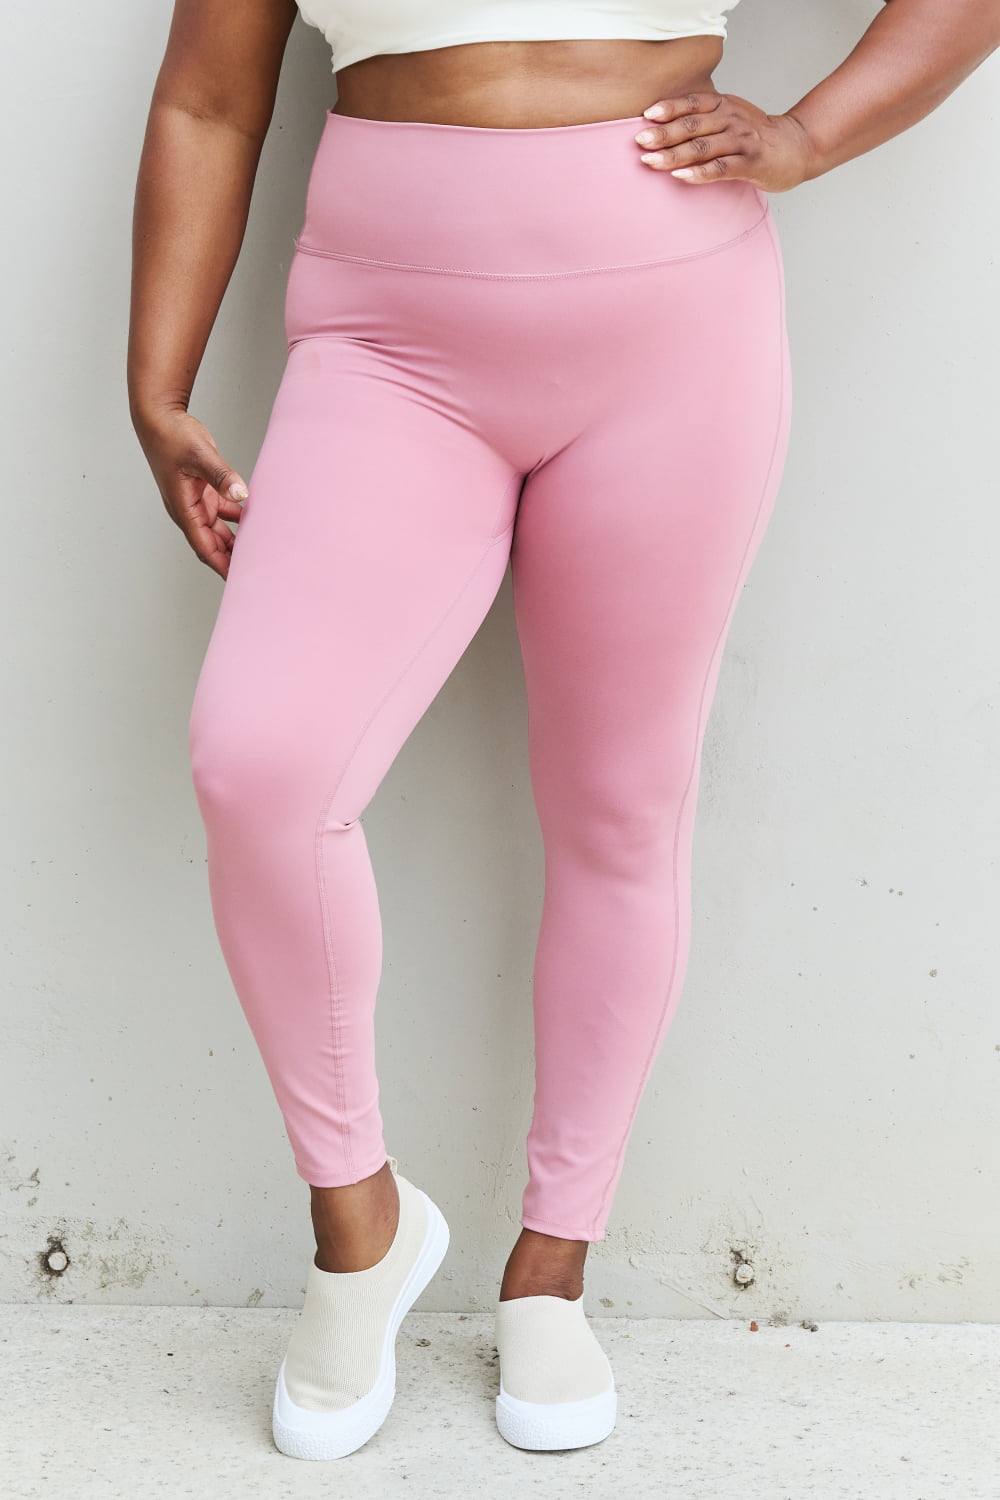 Zenana Fit For You High Waist Active Leggings in Light Rose - Online Only